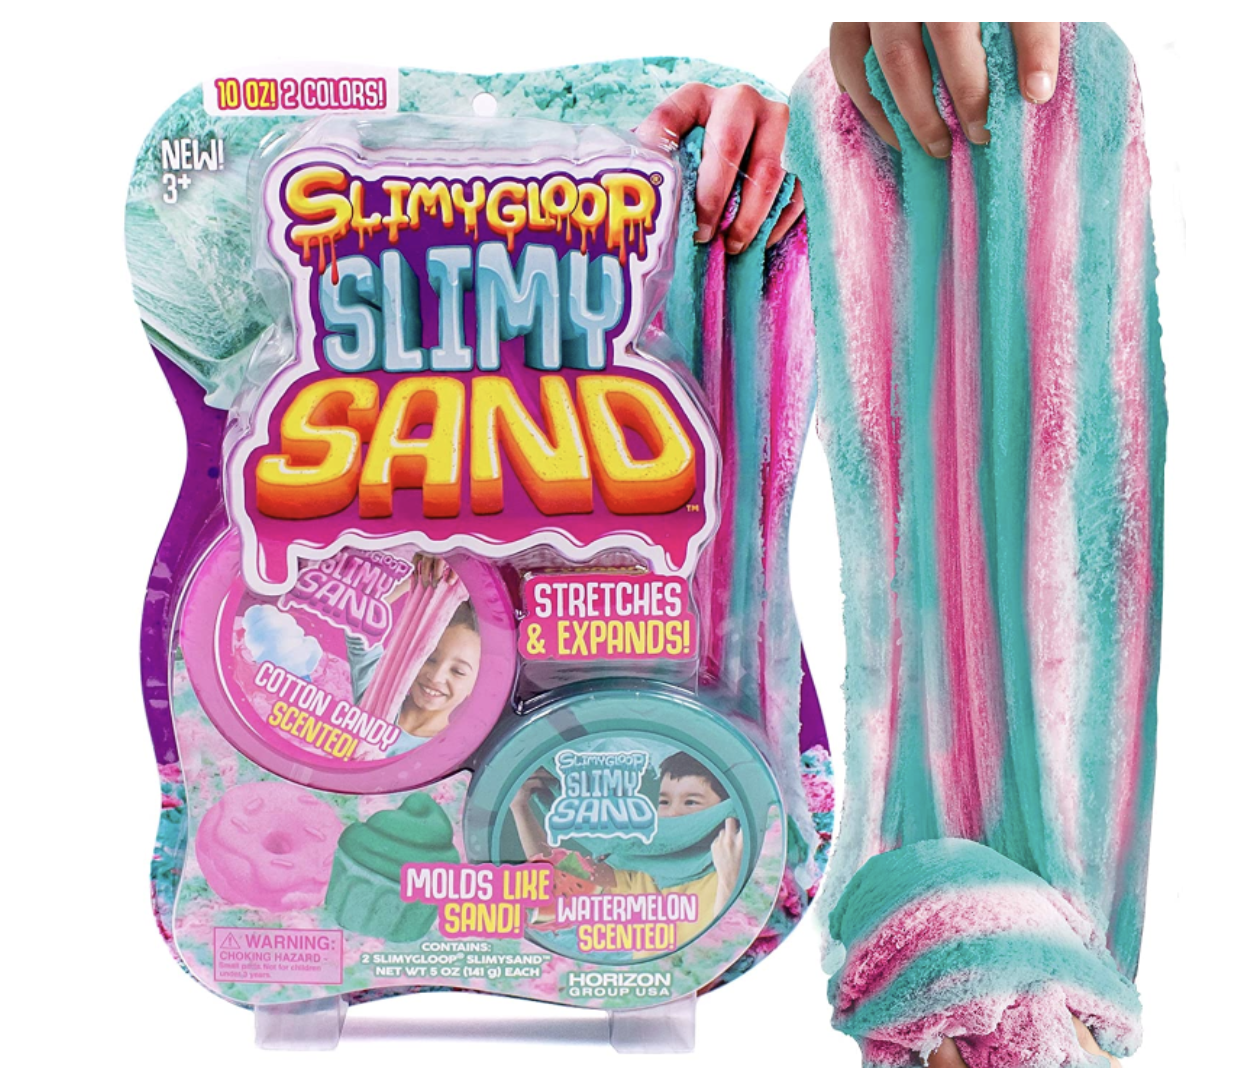 Slimygloop Slimy Sand Scented Watermelon/Cotton Candy